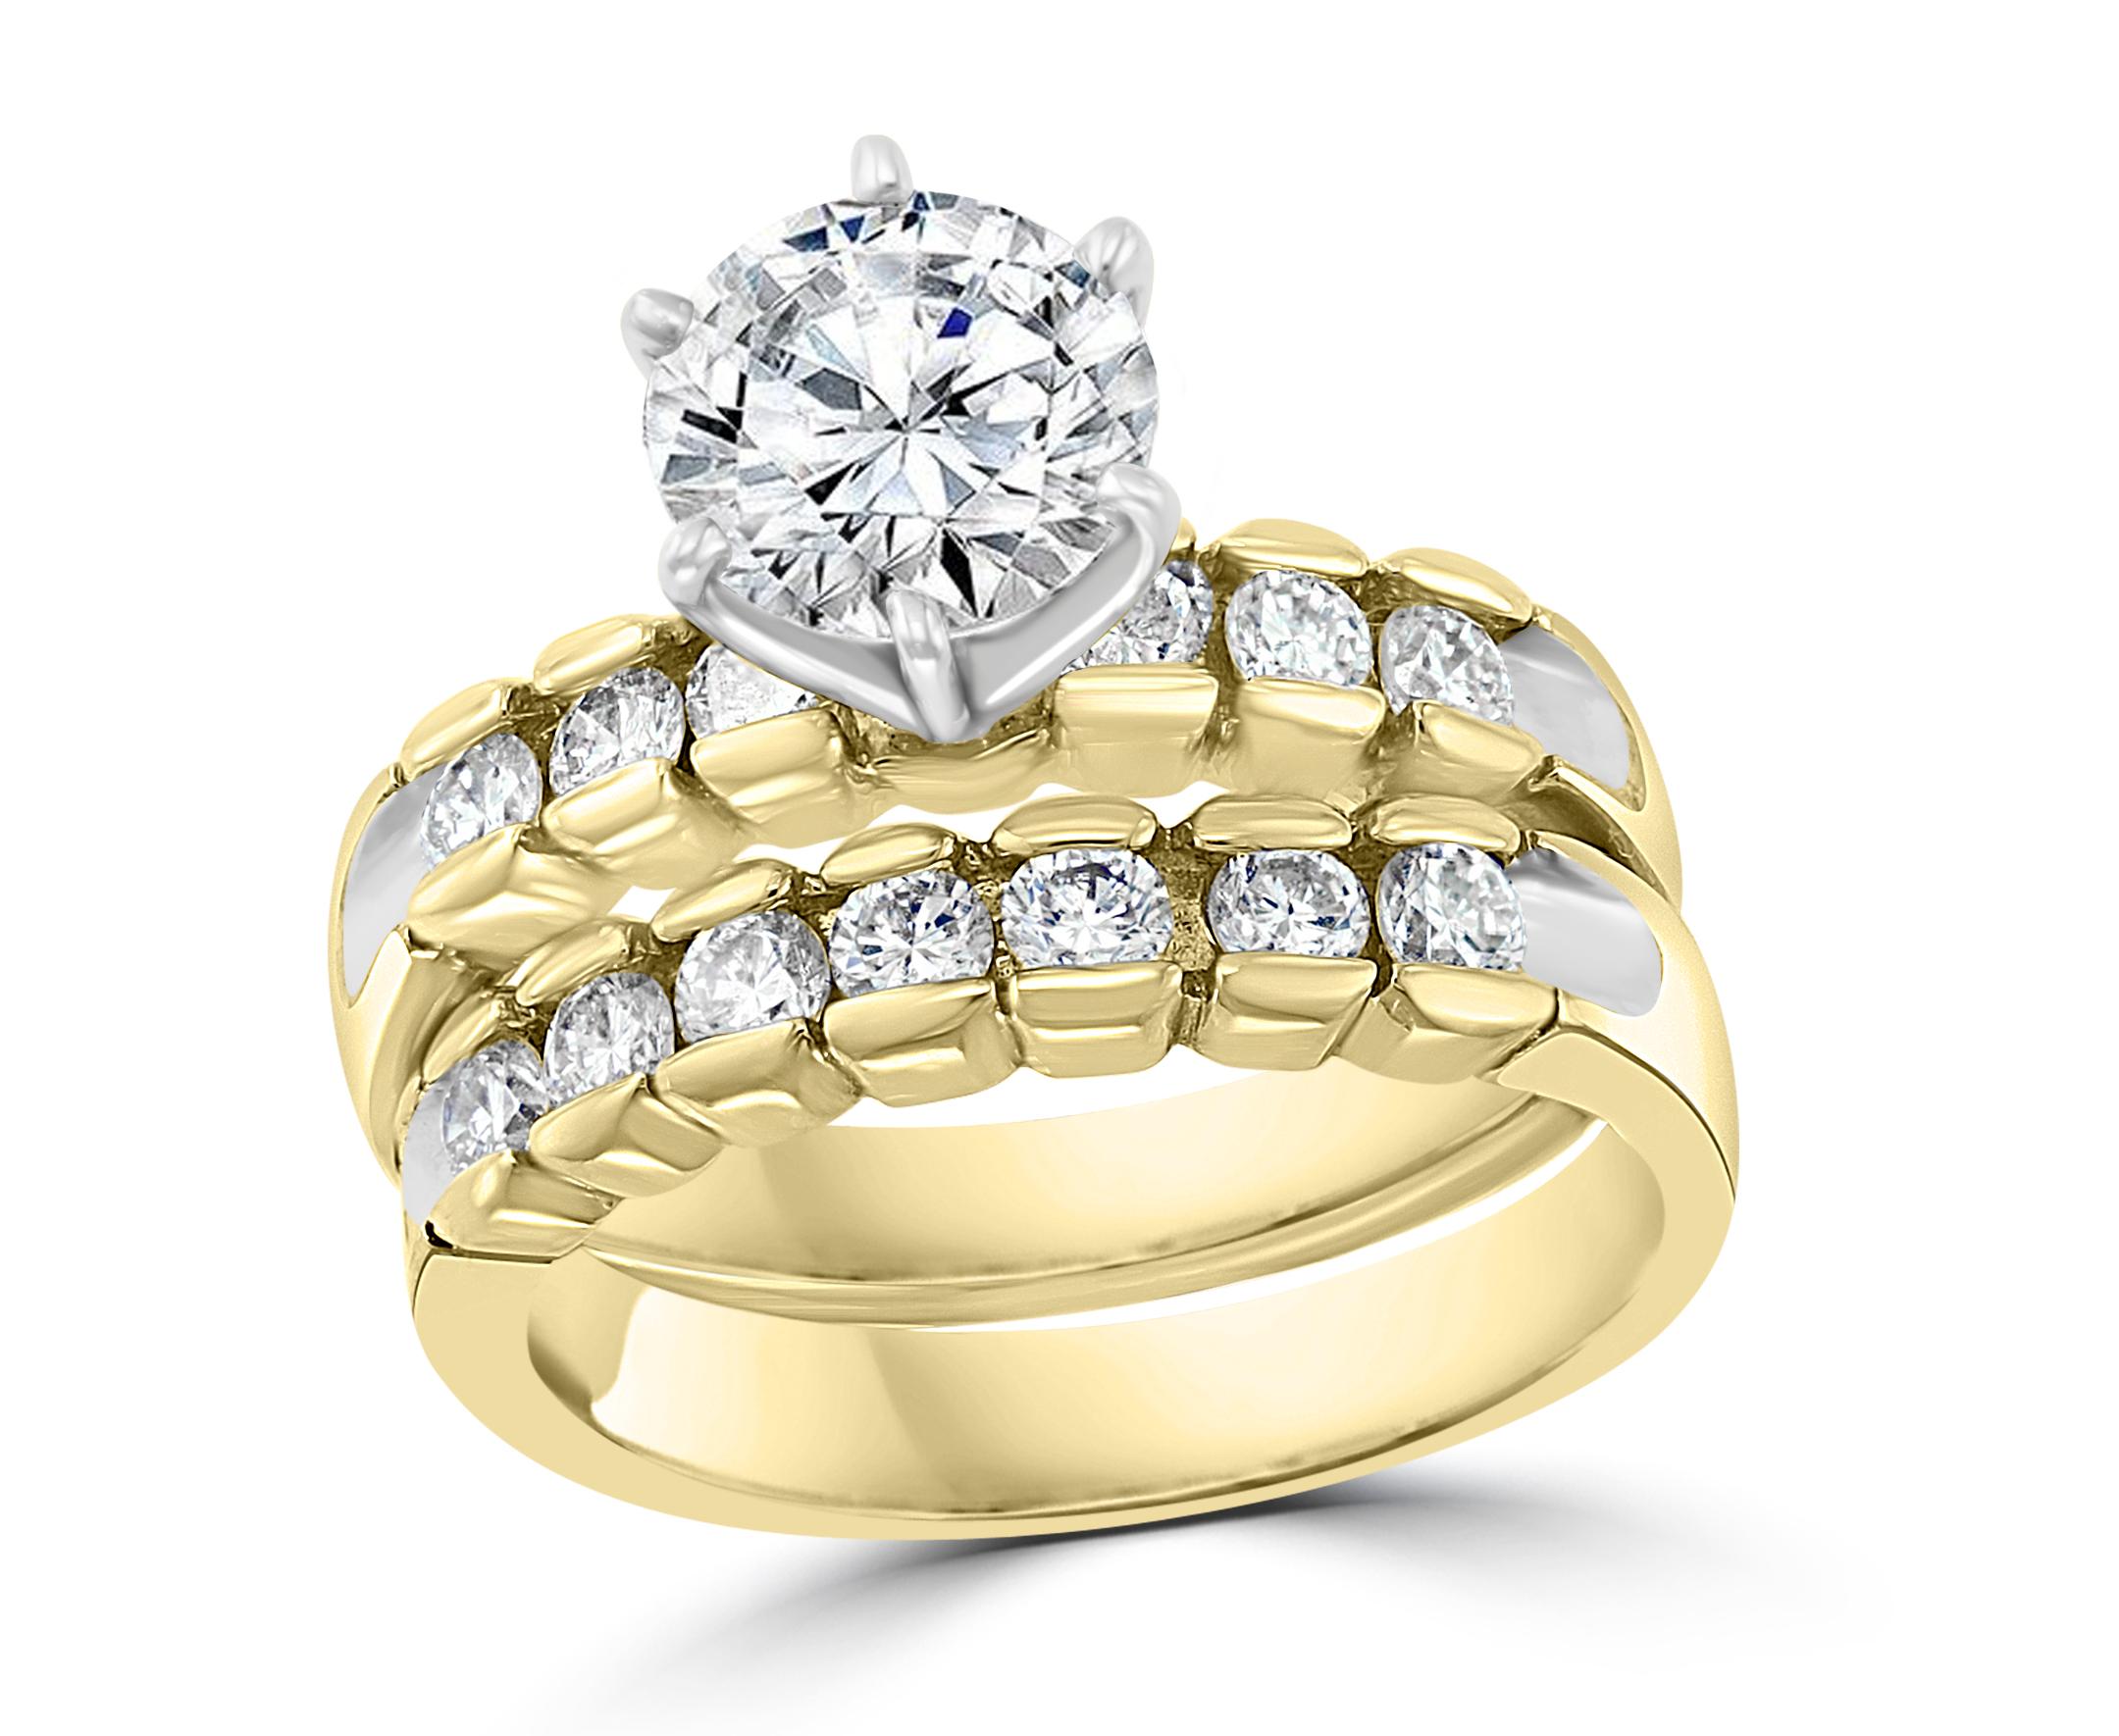 1.25 Carat Solitaire Round  Center Diamond Engagement 14 Yellow Gold Ring + Band
Prong set
14 K gold Stamped  
Diamond VS2 quality and H color.
Round brilliant cut diamonds are on either side of the main stone . Same size and matching diamonds are